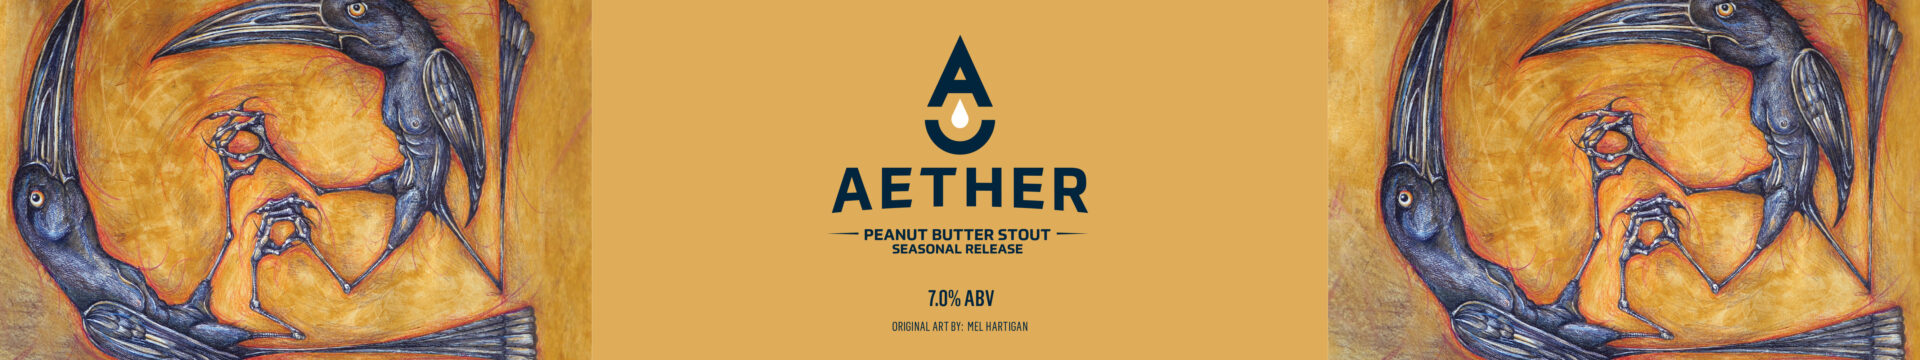 Aether Peanut Butter Stout Web Banner